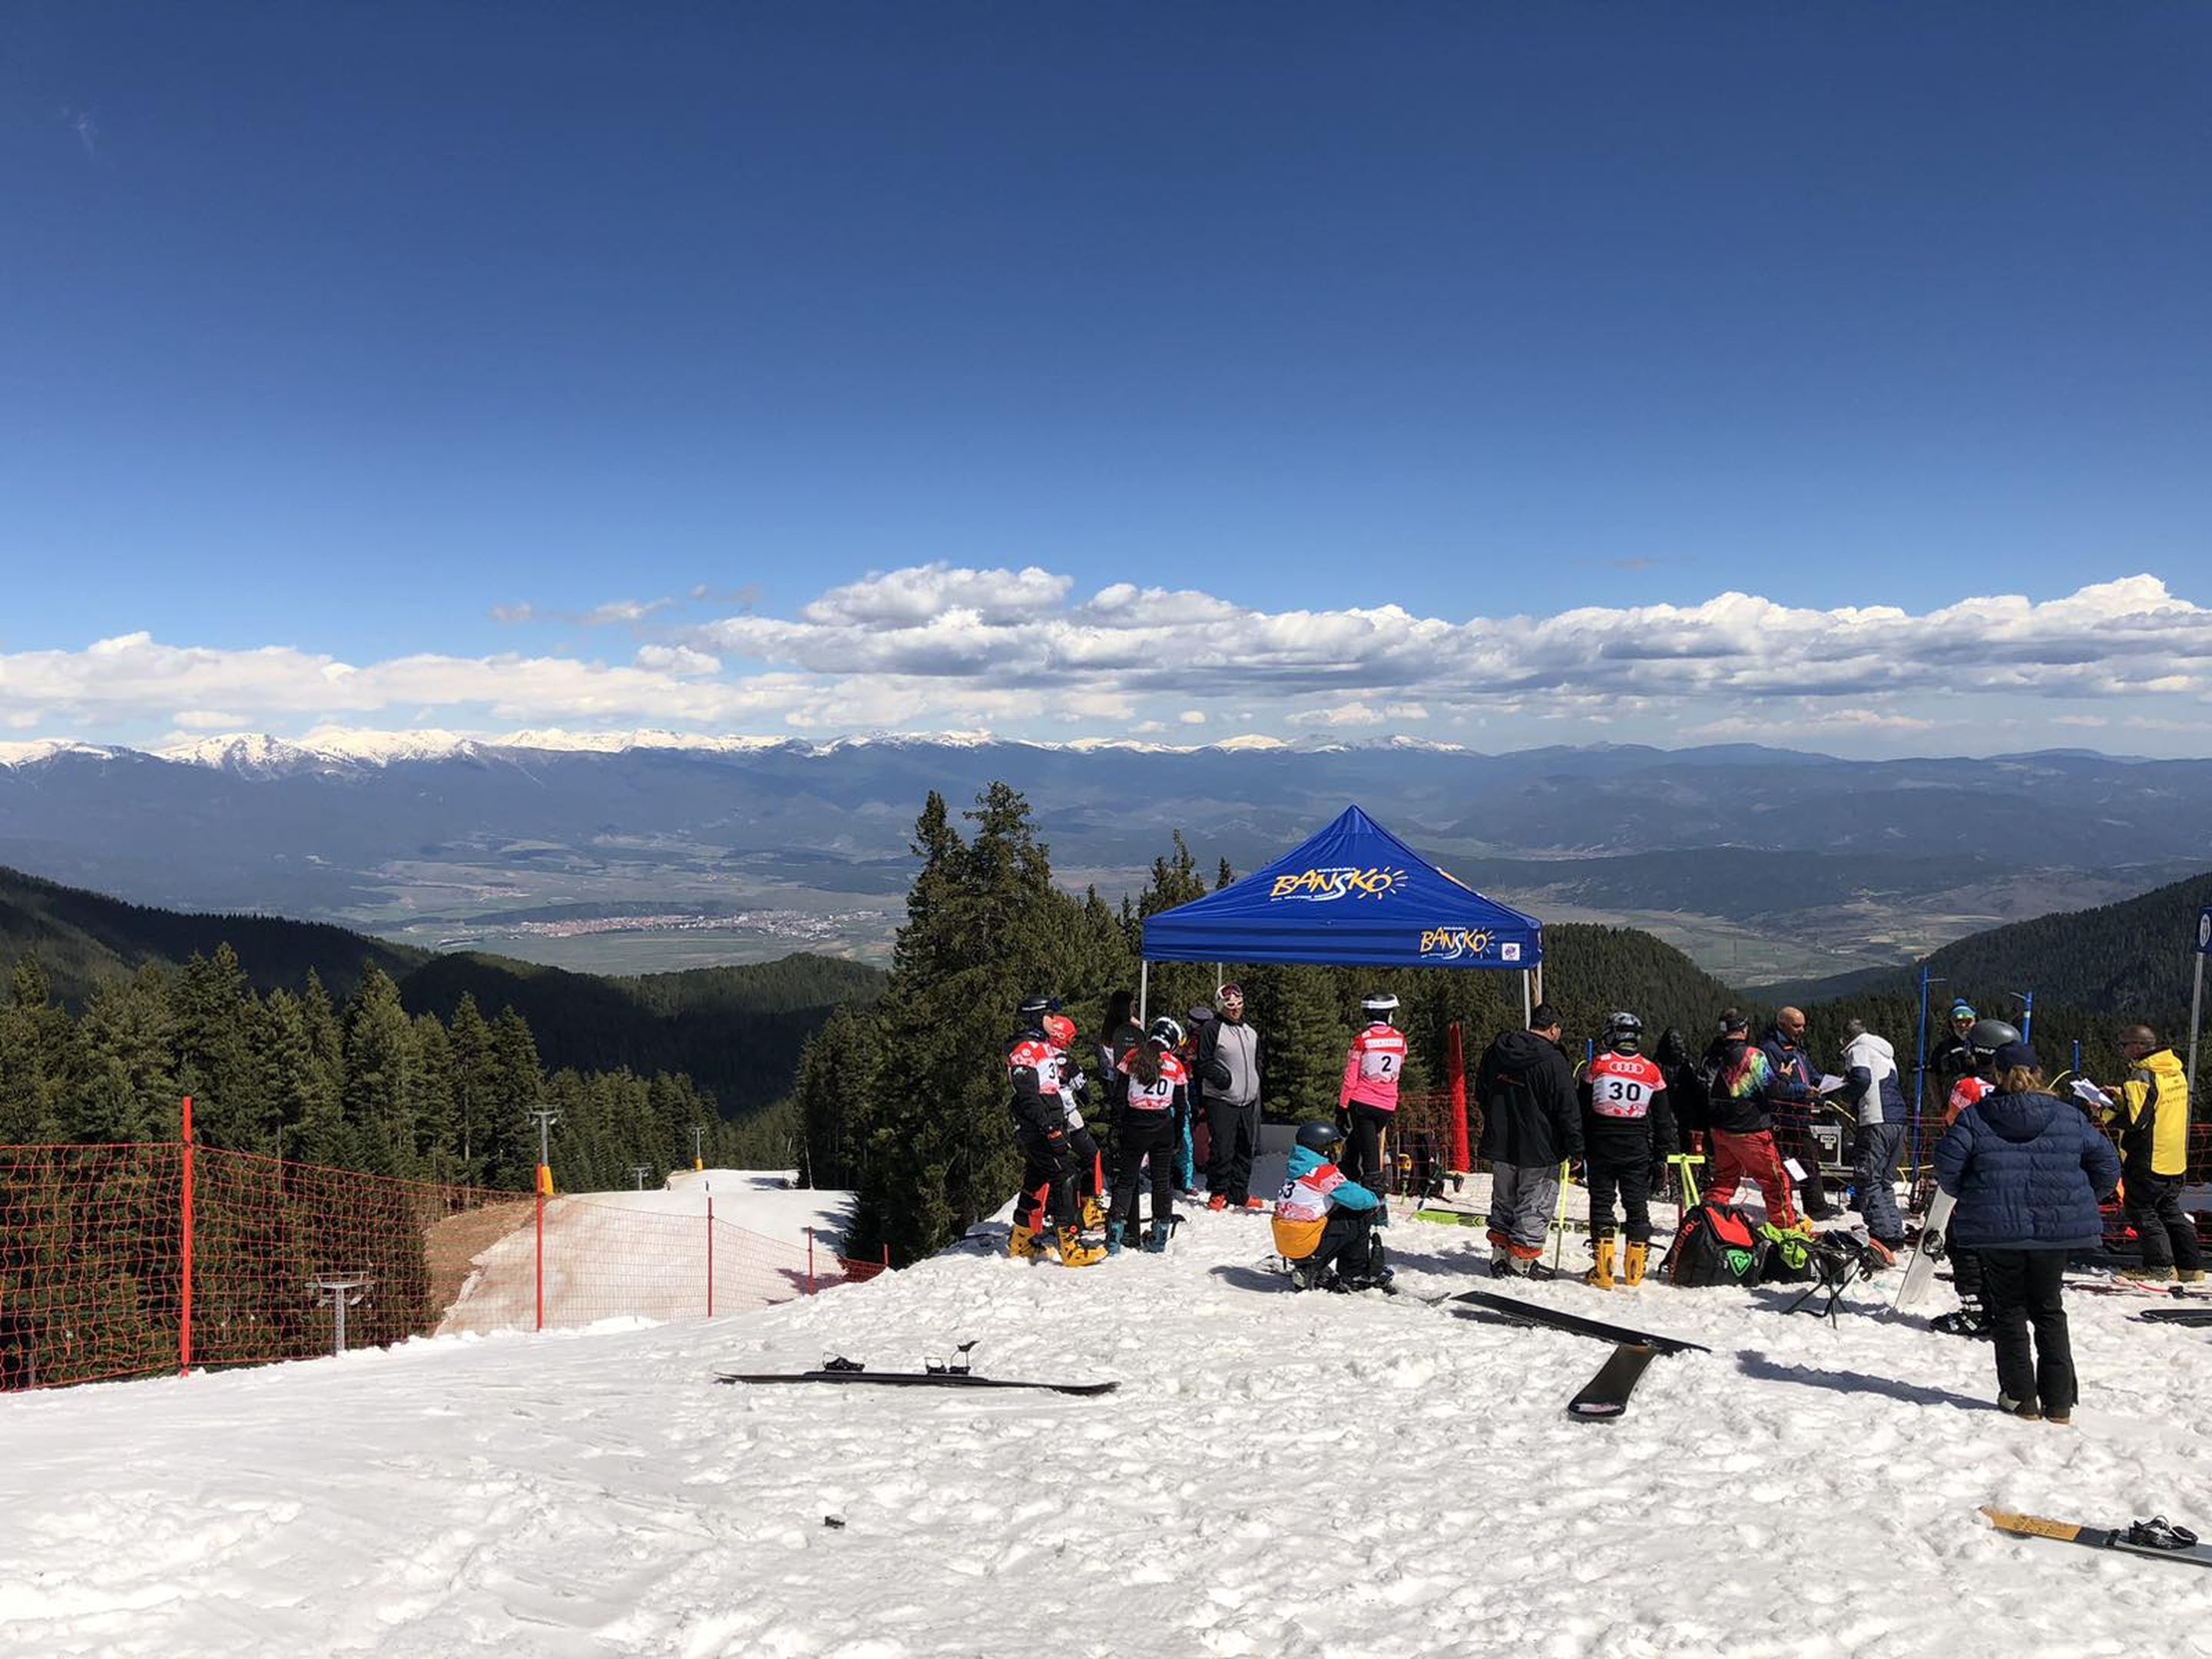 Snowboarders and coaches in the start area of the training slope in Bansko